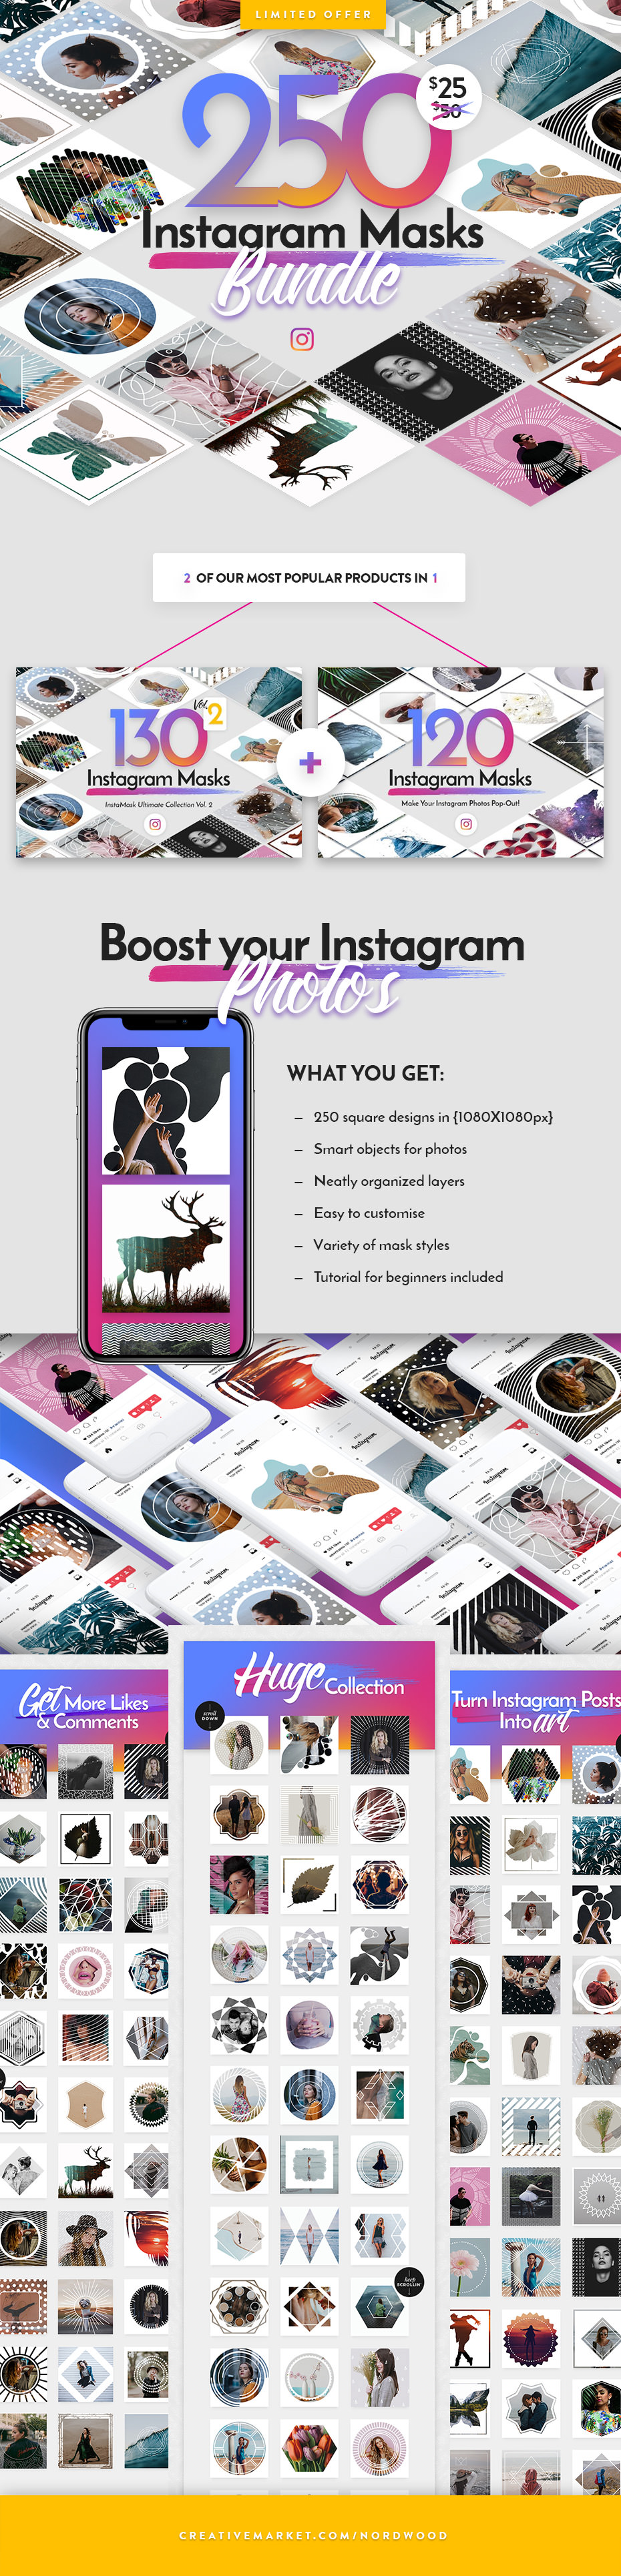 Download the Ultimate Collection of InstaMask for Instagram - Web Graphics & UI Lorelei Web Design